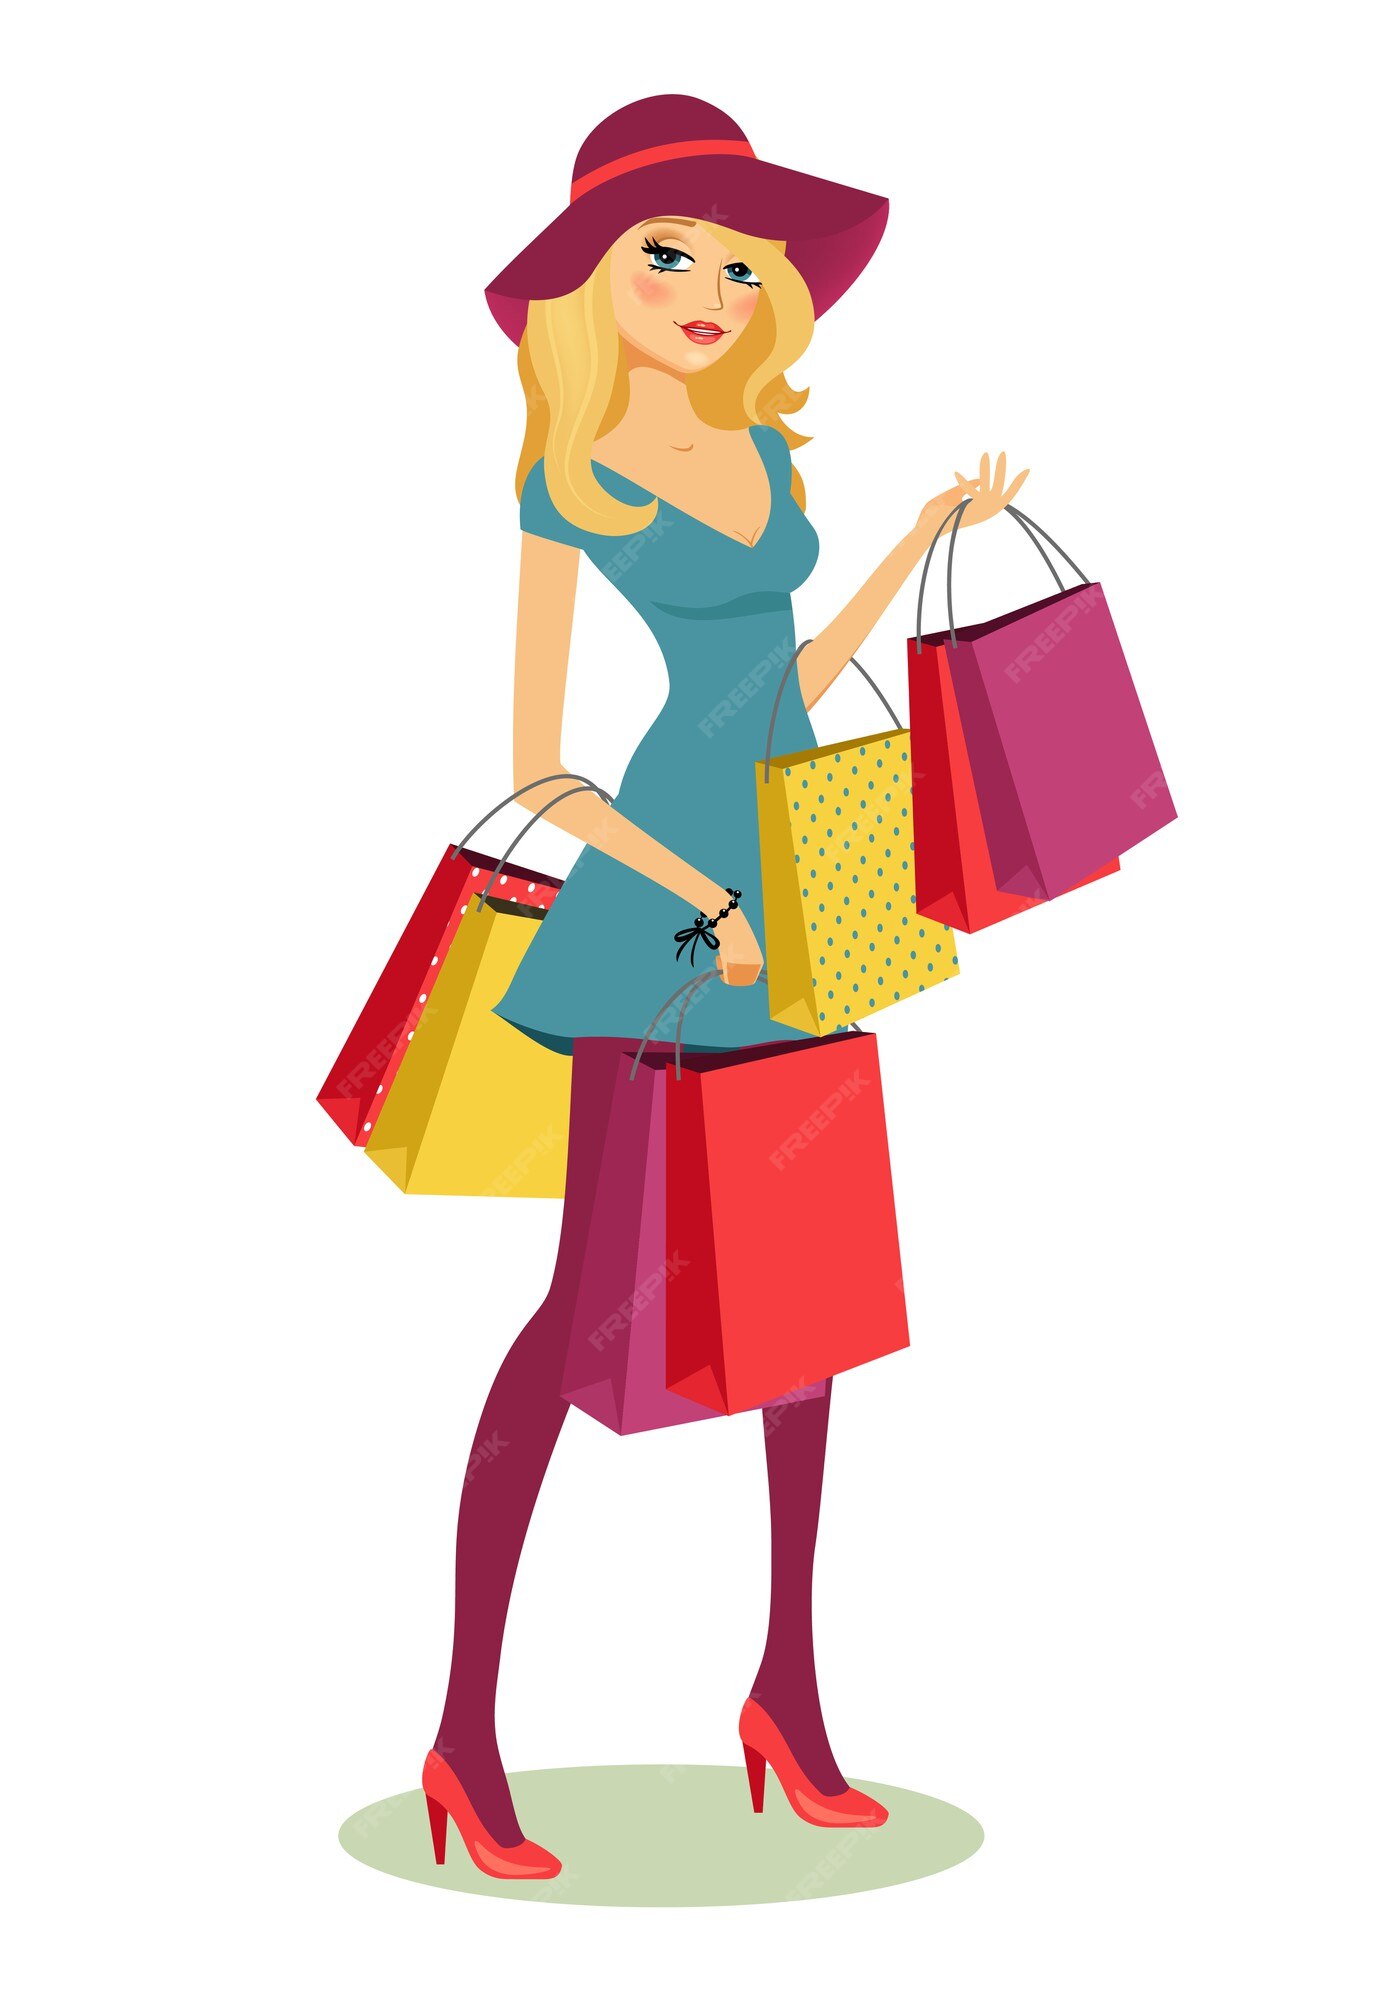 jelly style Towards Woman shopping bags Vectors & Illustrations for Free Download | Freepik